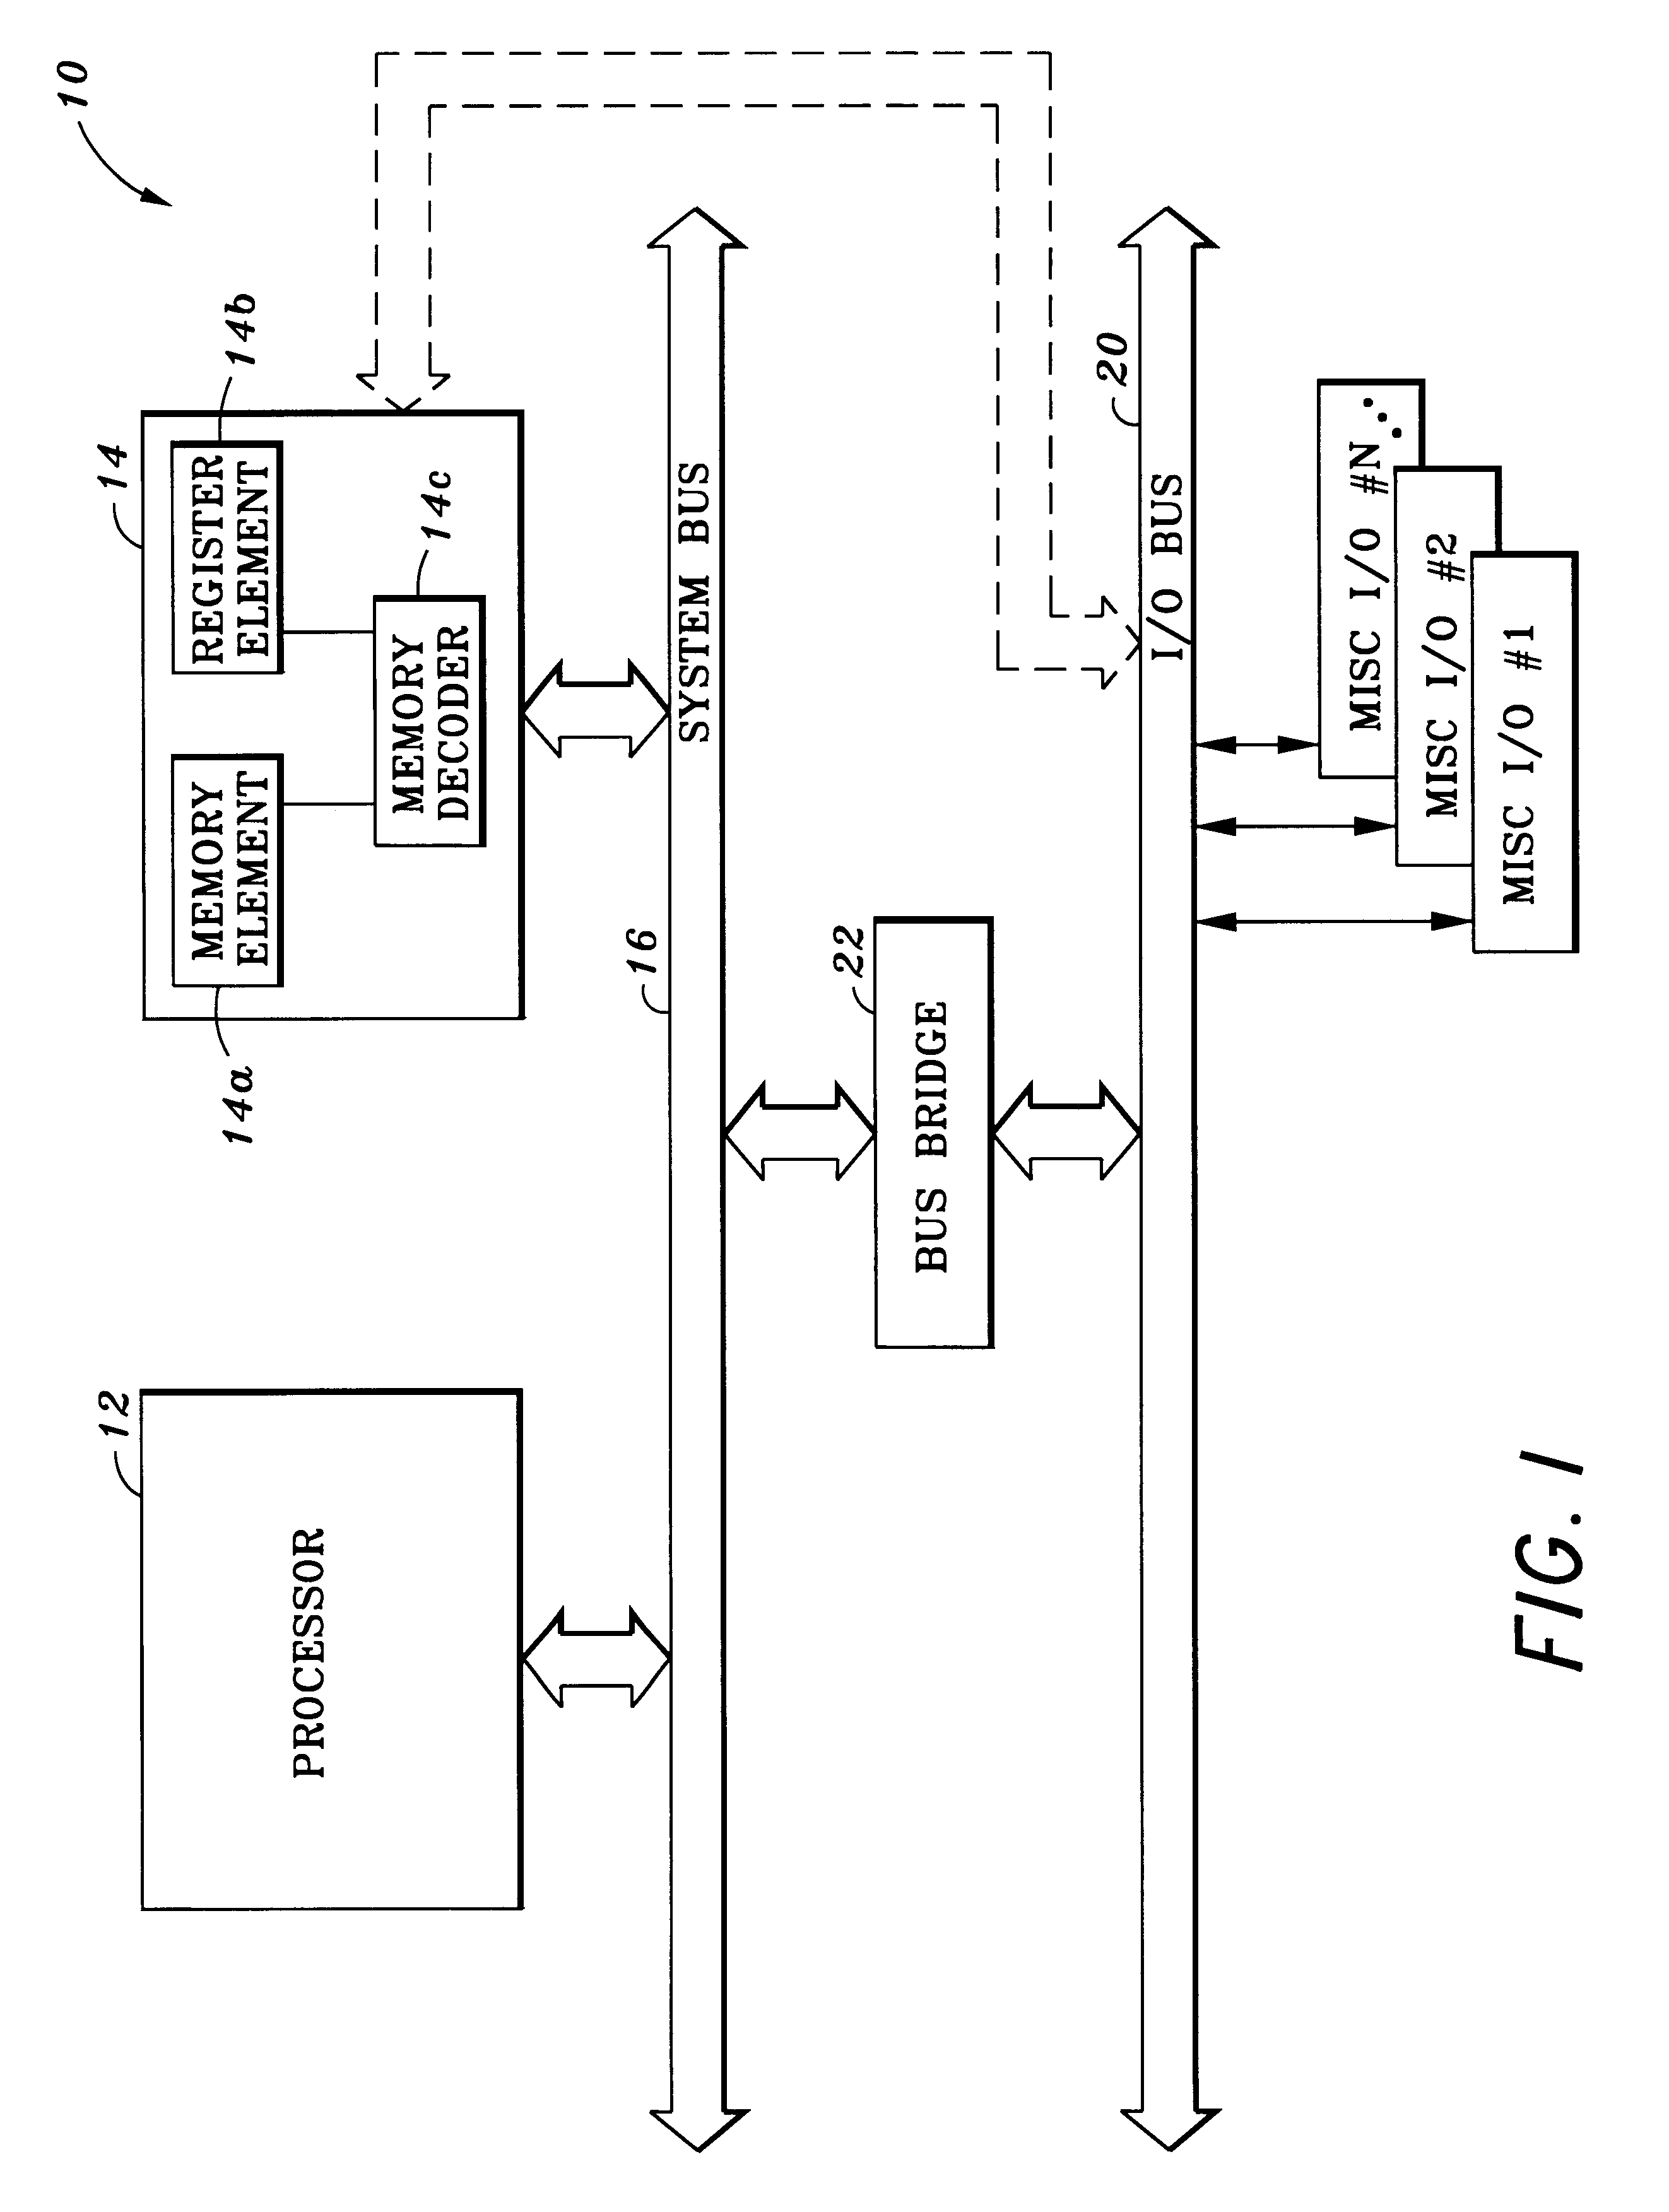 Method and apparatus for selecting functional space in a low pin count memory device